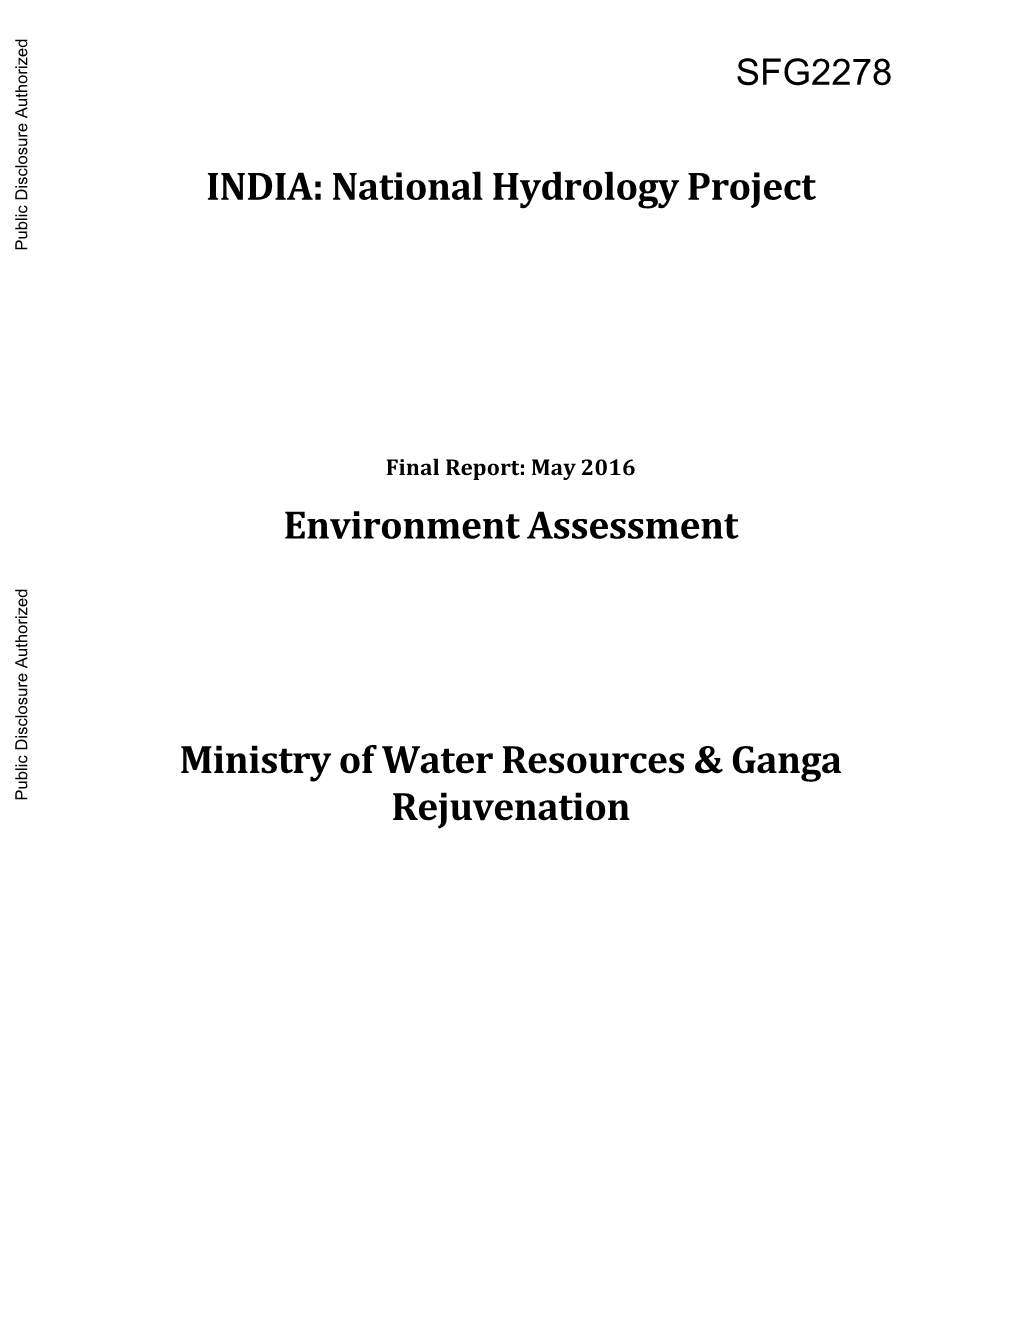 INDIA: National Hydrology Project